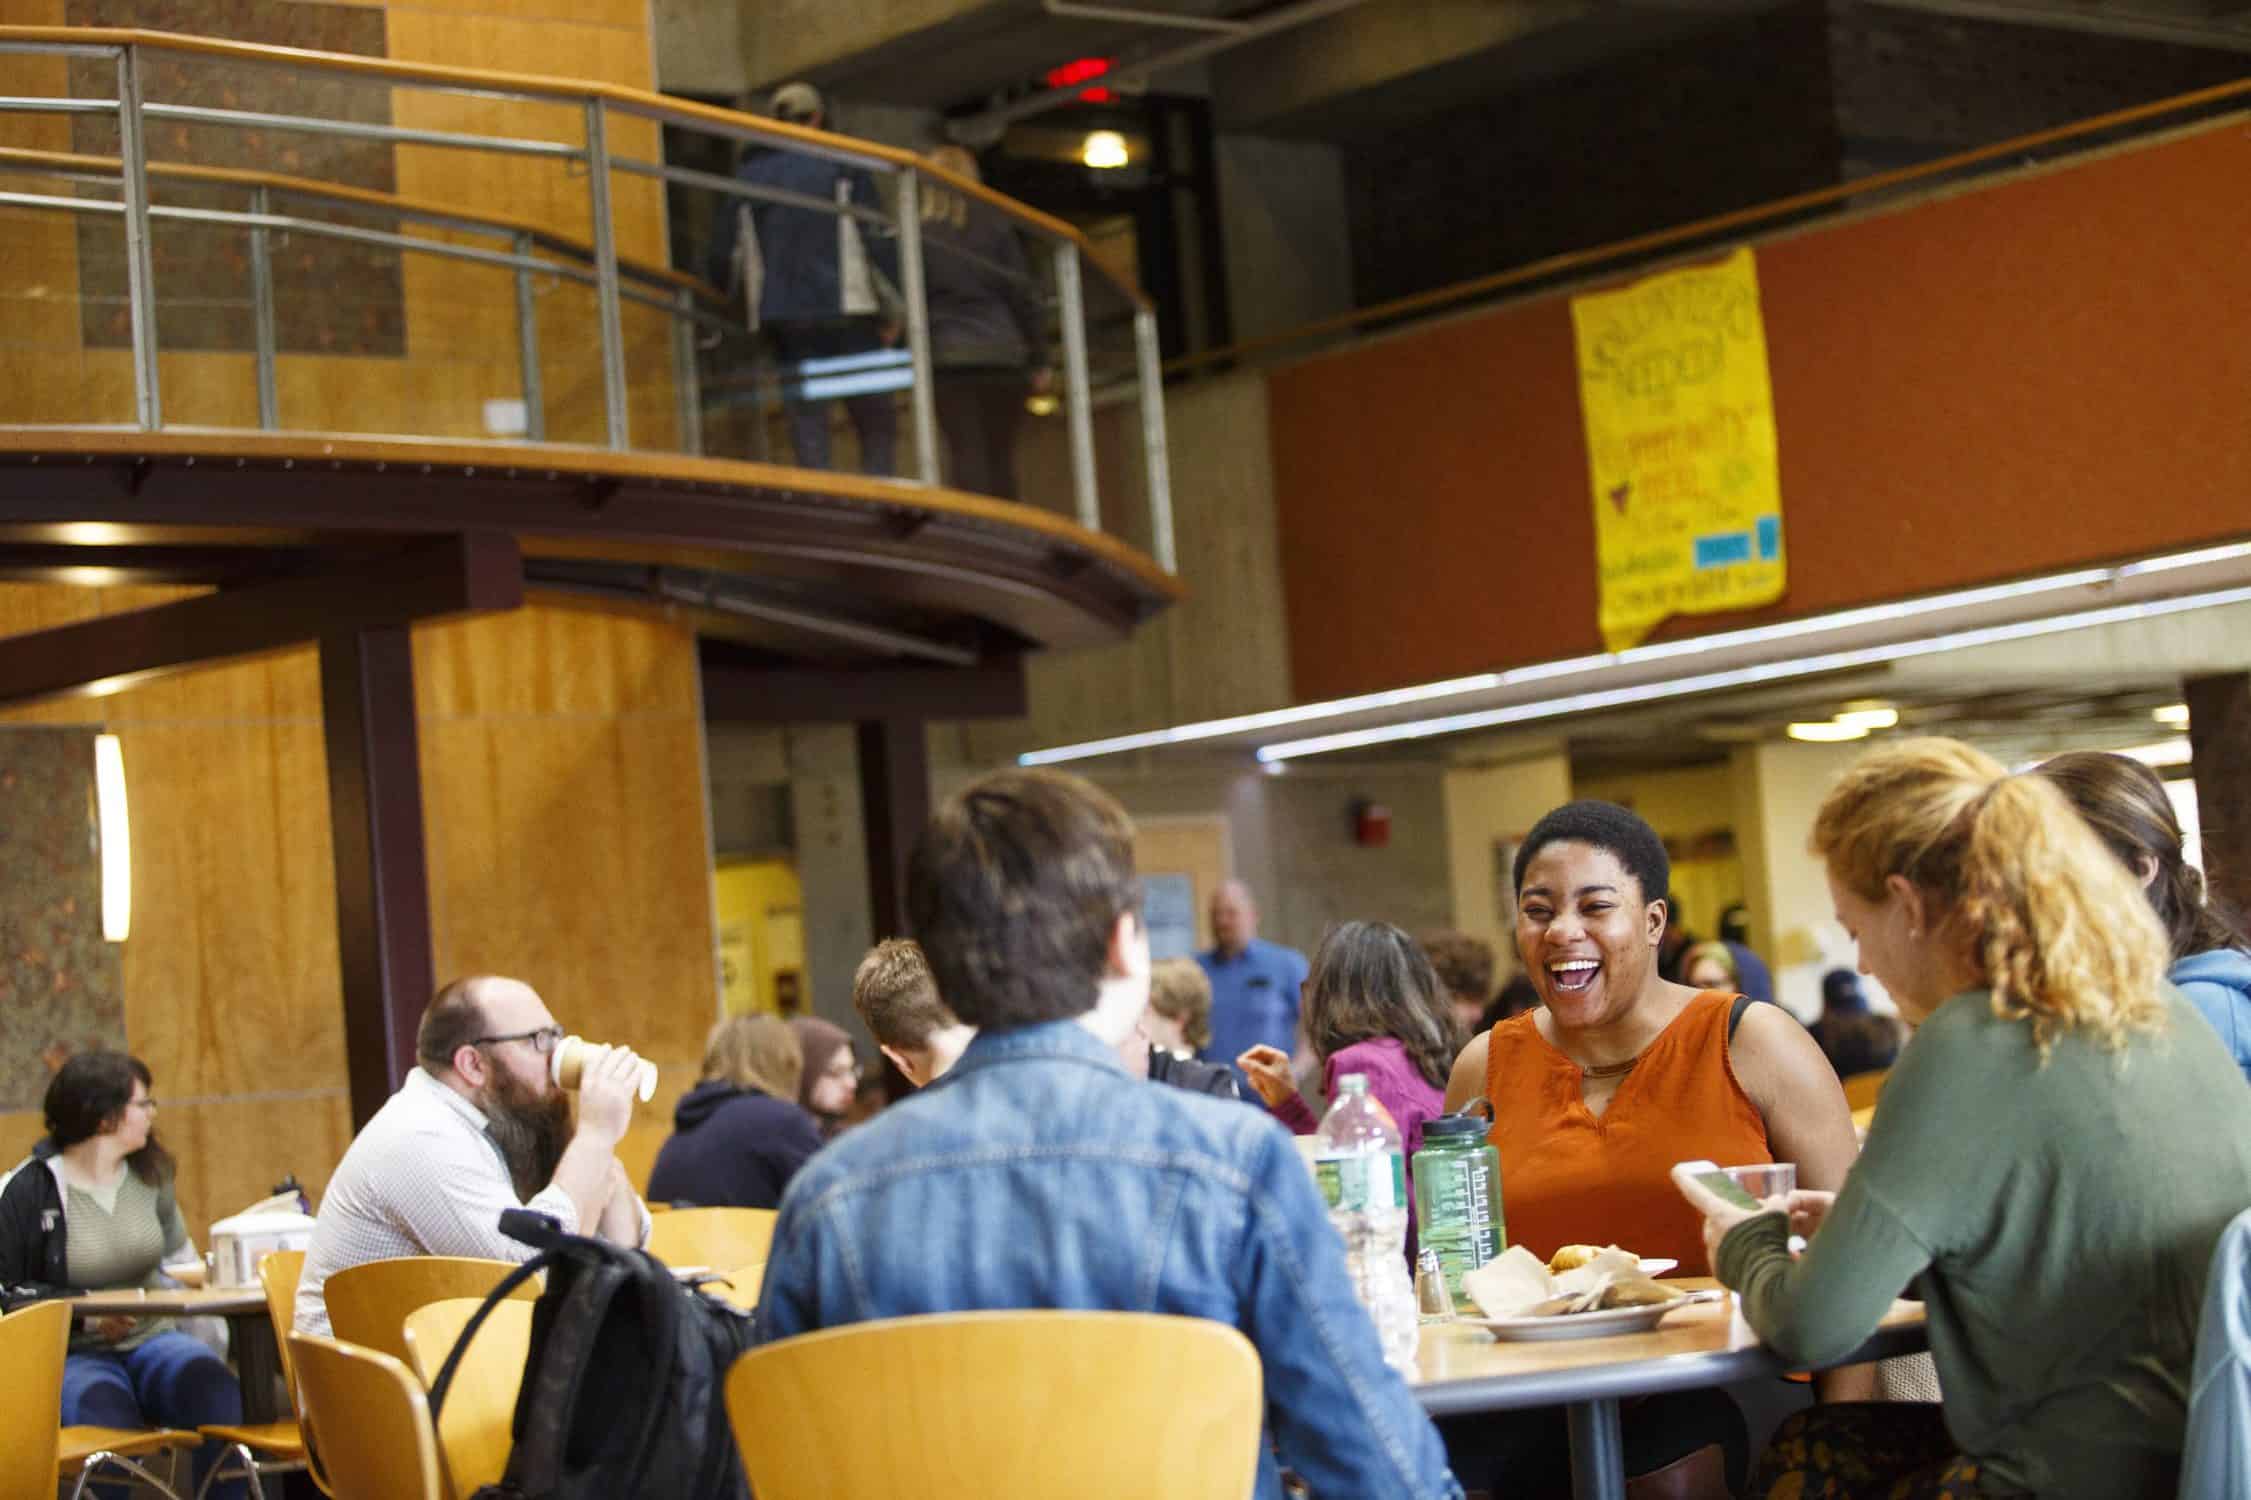 Students enjoy a delicious meal in the dining hall